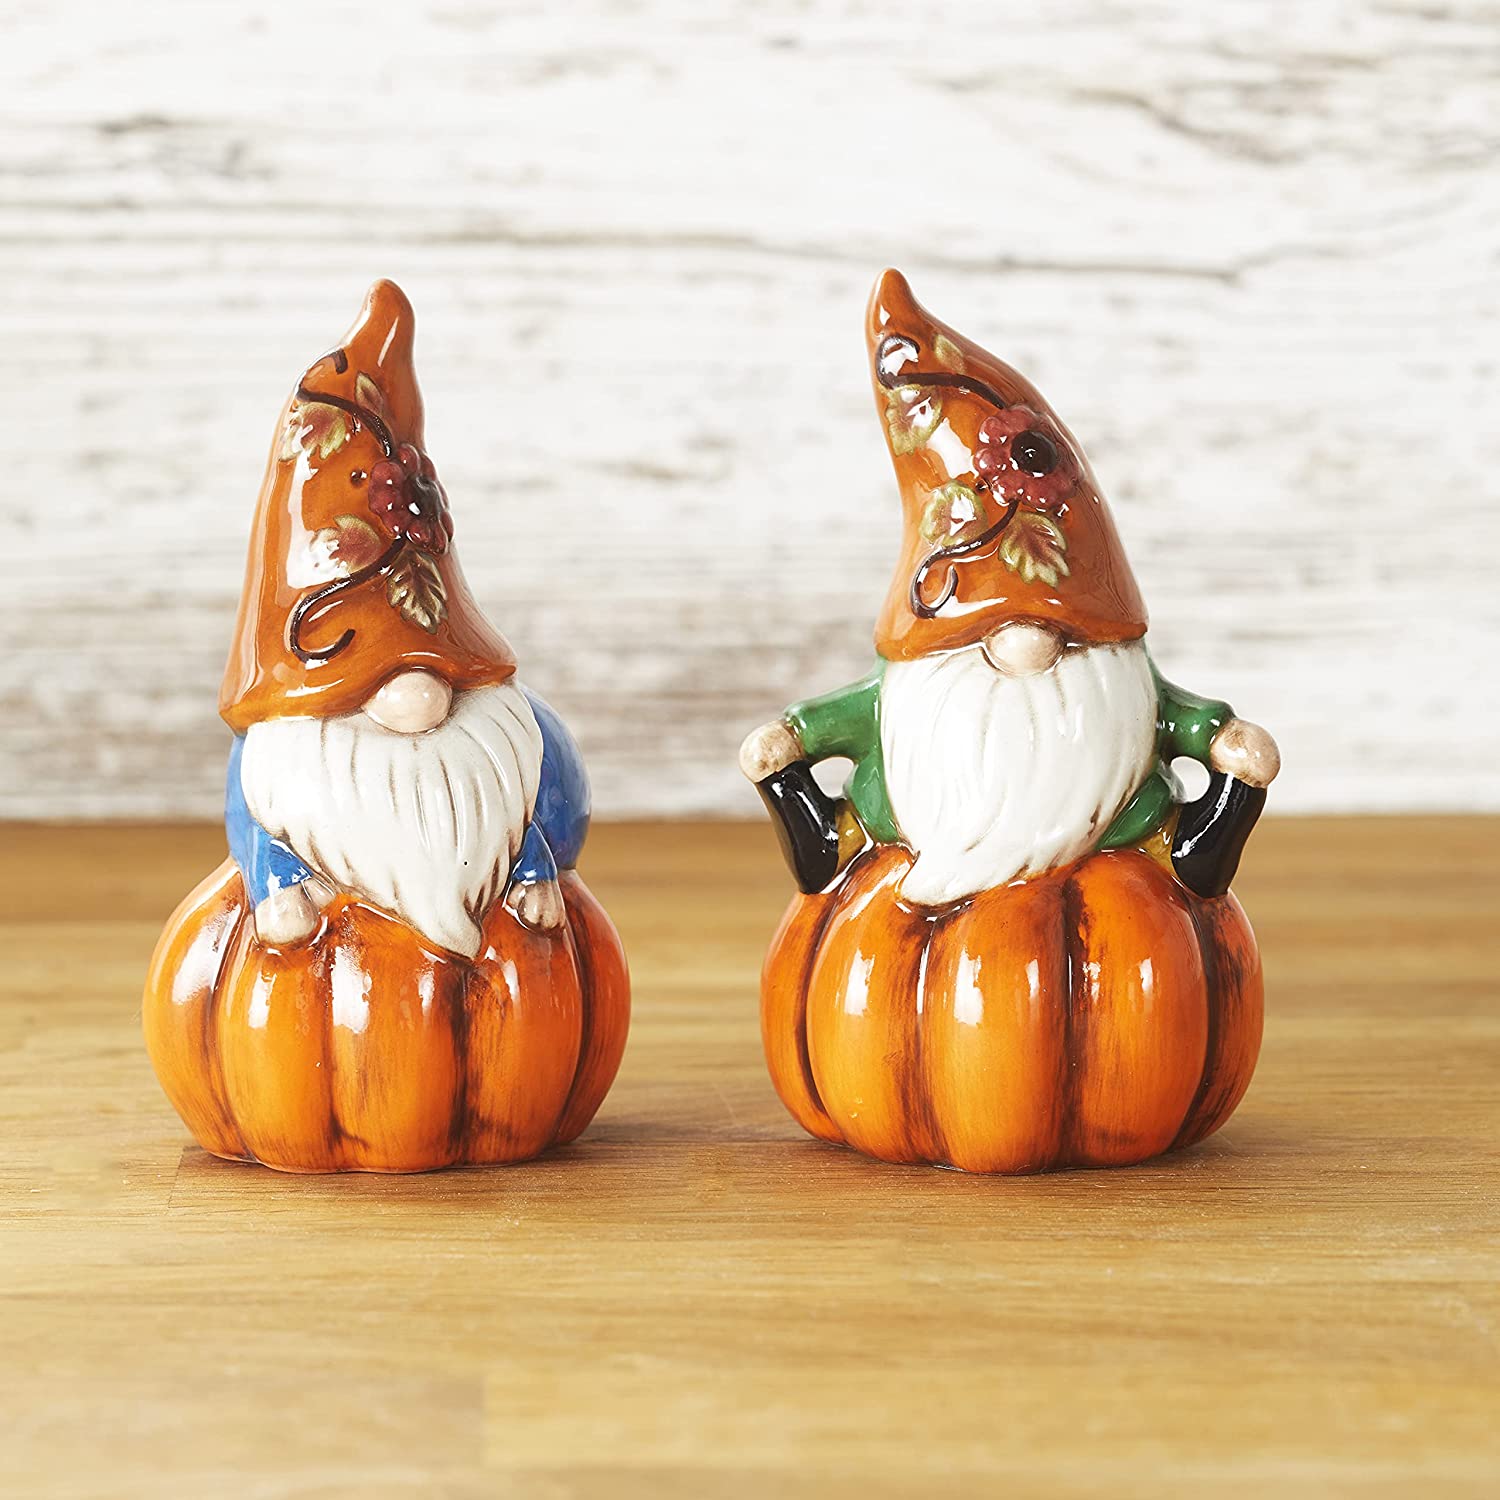 Ceramic figurines of gnomes perched on a pumpkin and wearing a harvest orange hat.